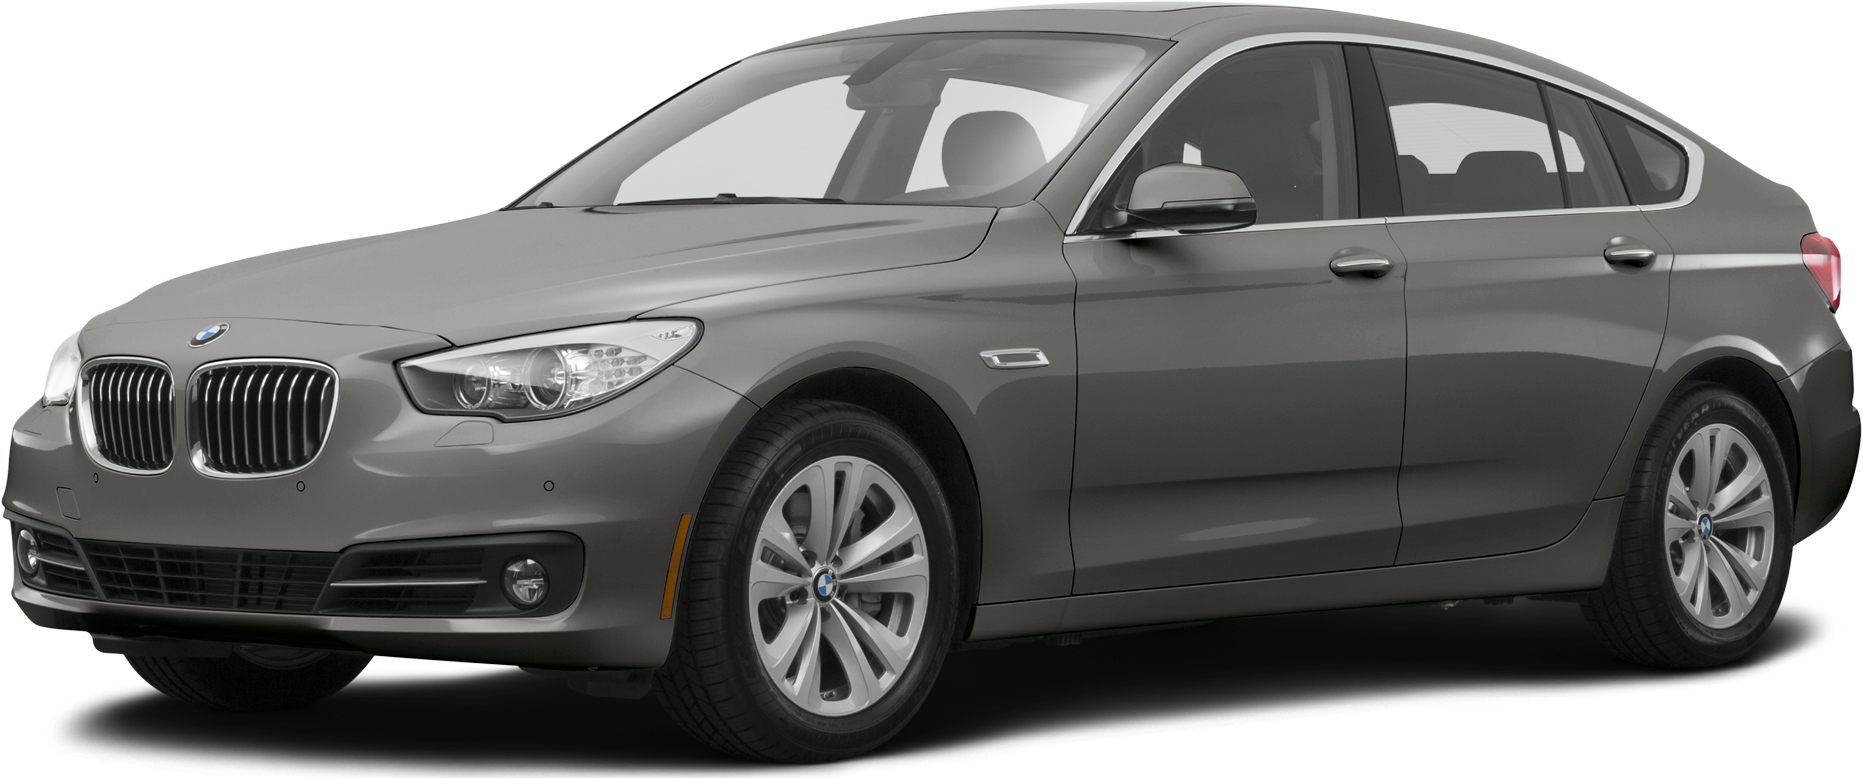 2015 BMW 5 Series Values & Cars for Sale | Kelley Blue Book